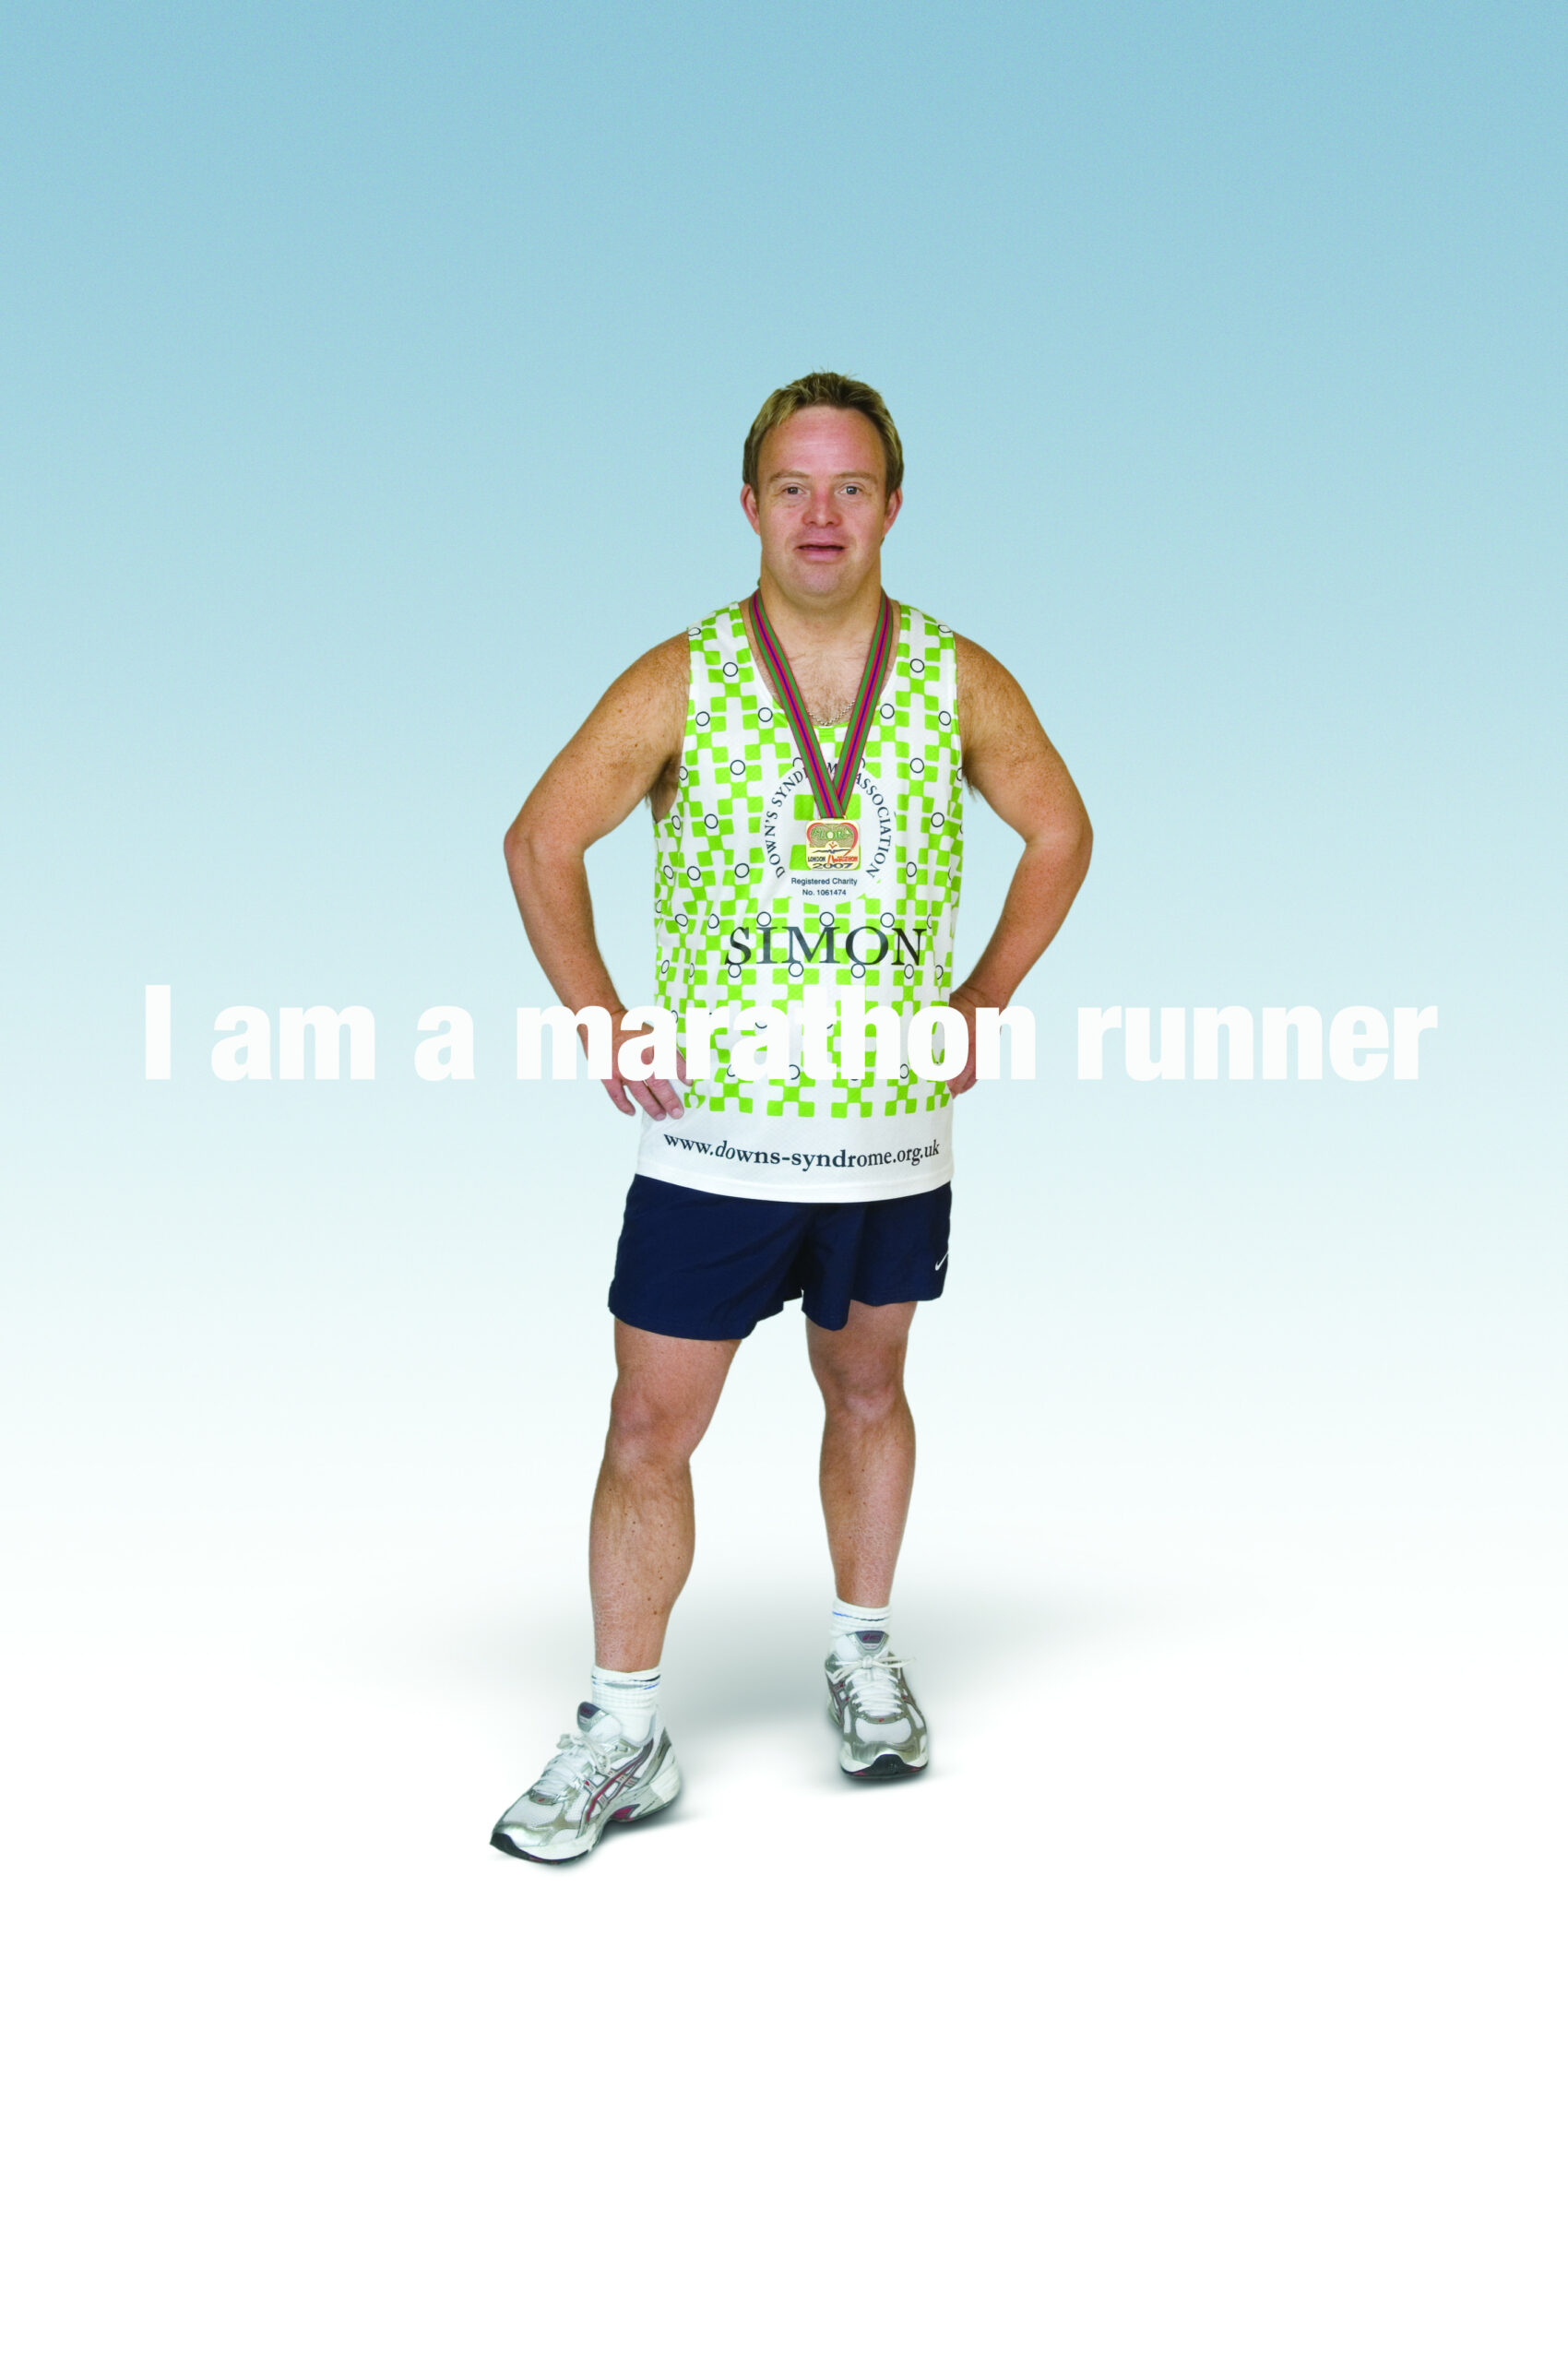 A posed photograph of Simon in his running gear with his London Marathon medal around his neck. Text across the image says 'I am a marathon runner'